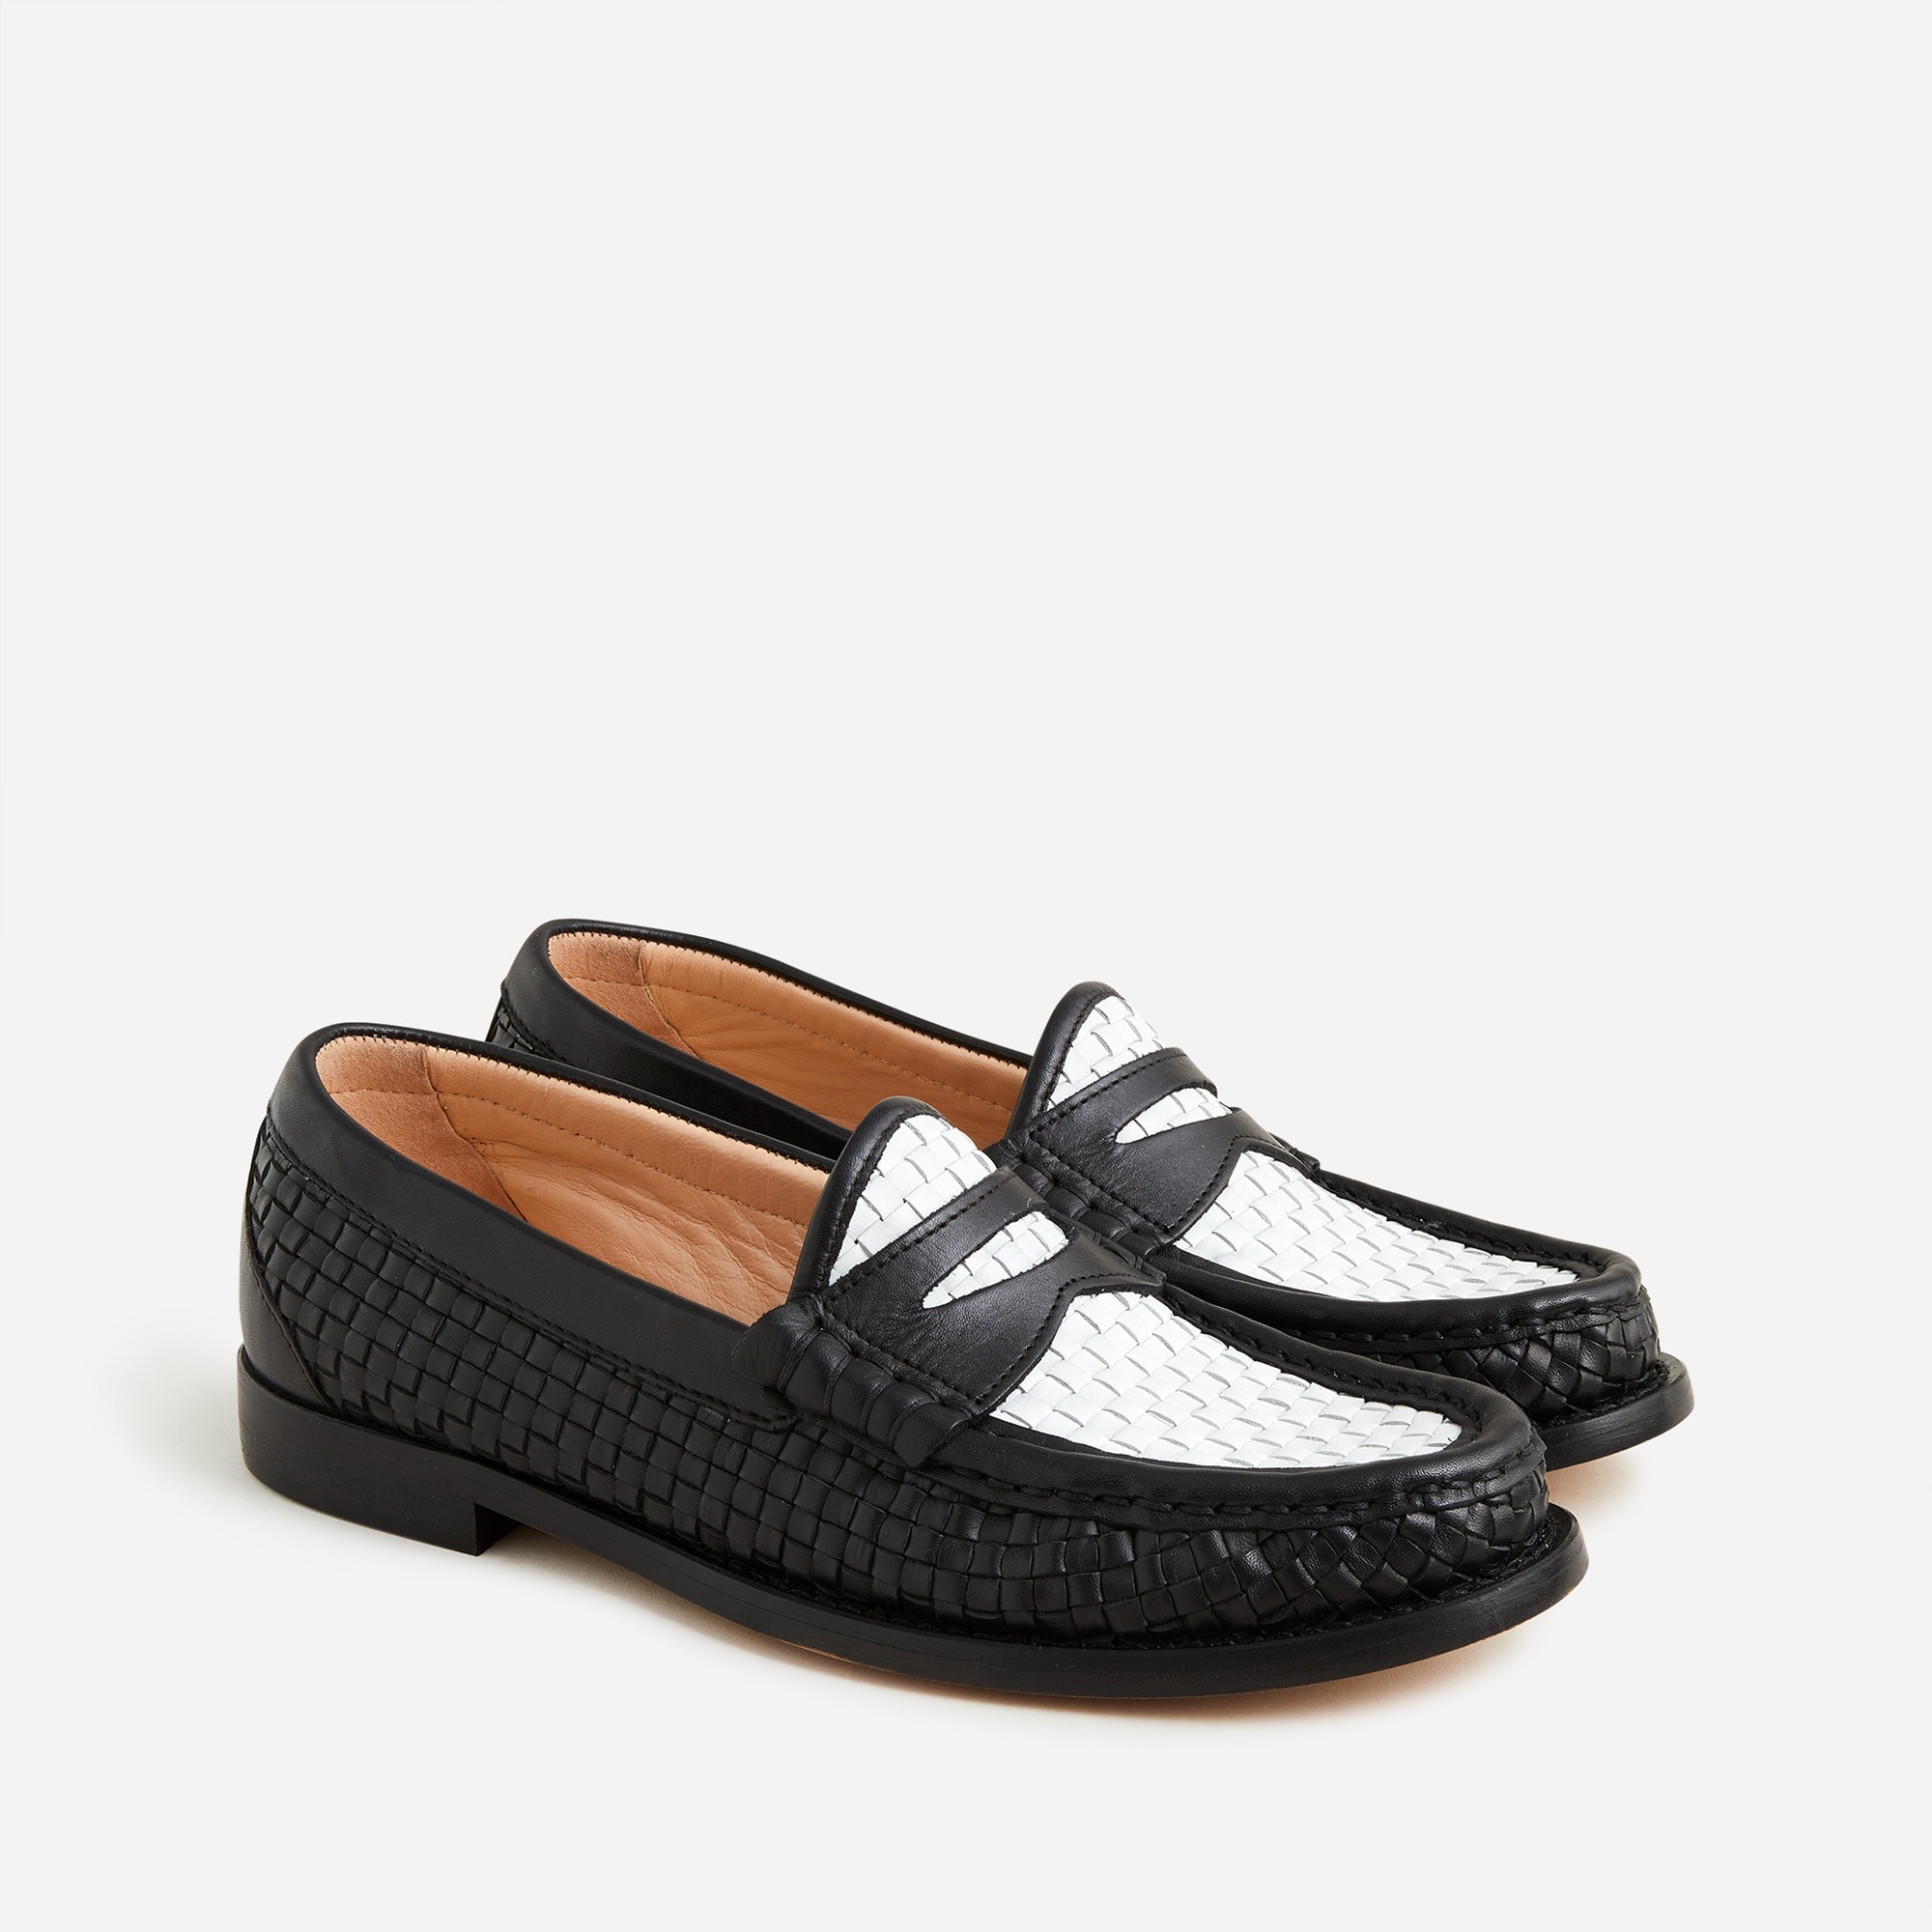  Winona penny loafers in woven Italian leather